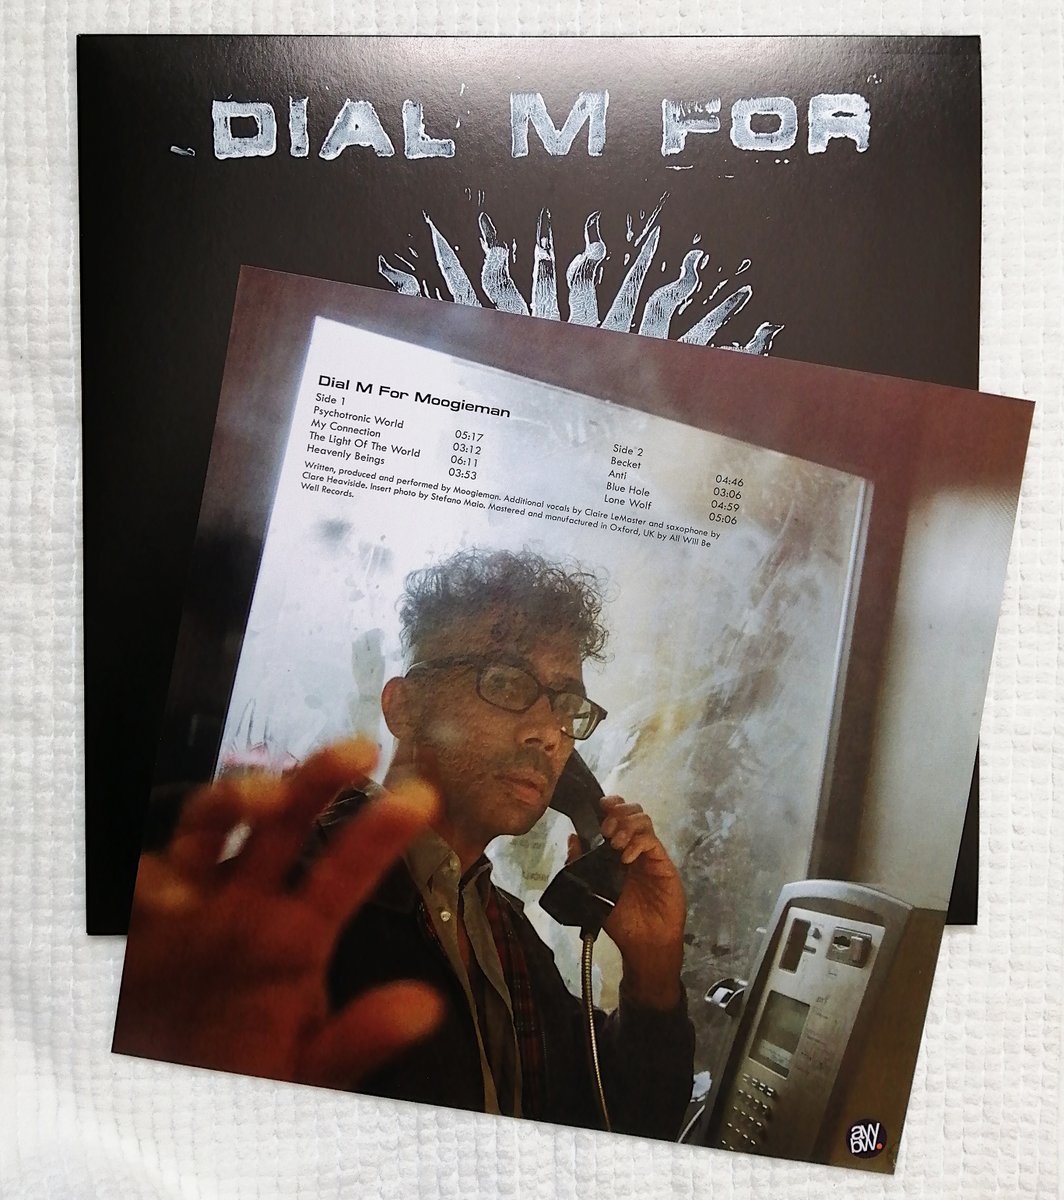 ☎ New DIal M For Moogieman black #vinyl12inch available. There'll be a few copies for sale at the next gig on Sat 17 Feb @portmahon_ox With @thesubtheory and @ChollyMusic Curated by @omsmagazine ☎ Tickets: wegottickets.com/event/606743